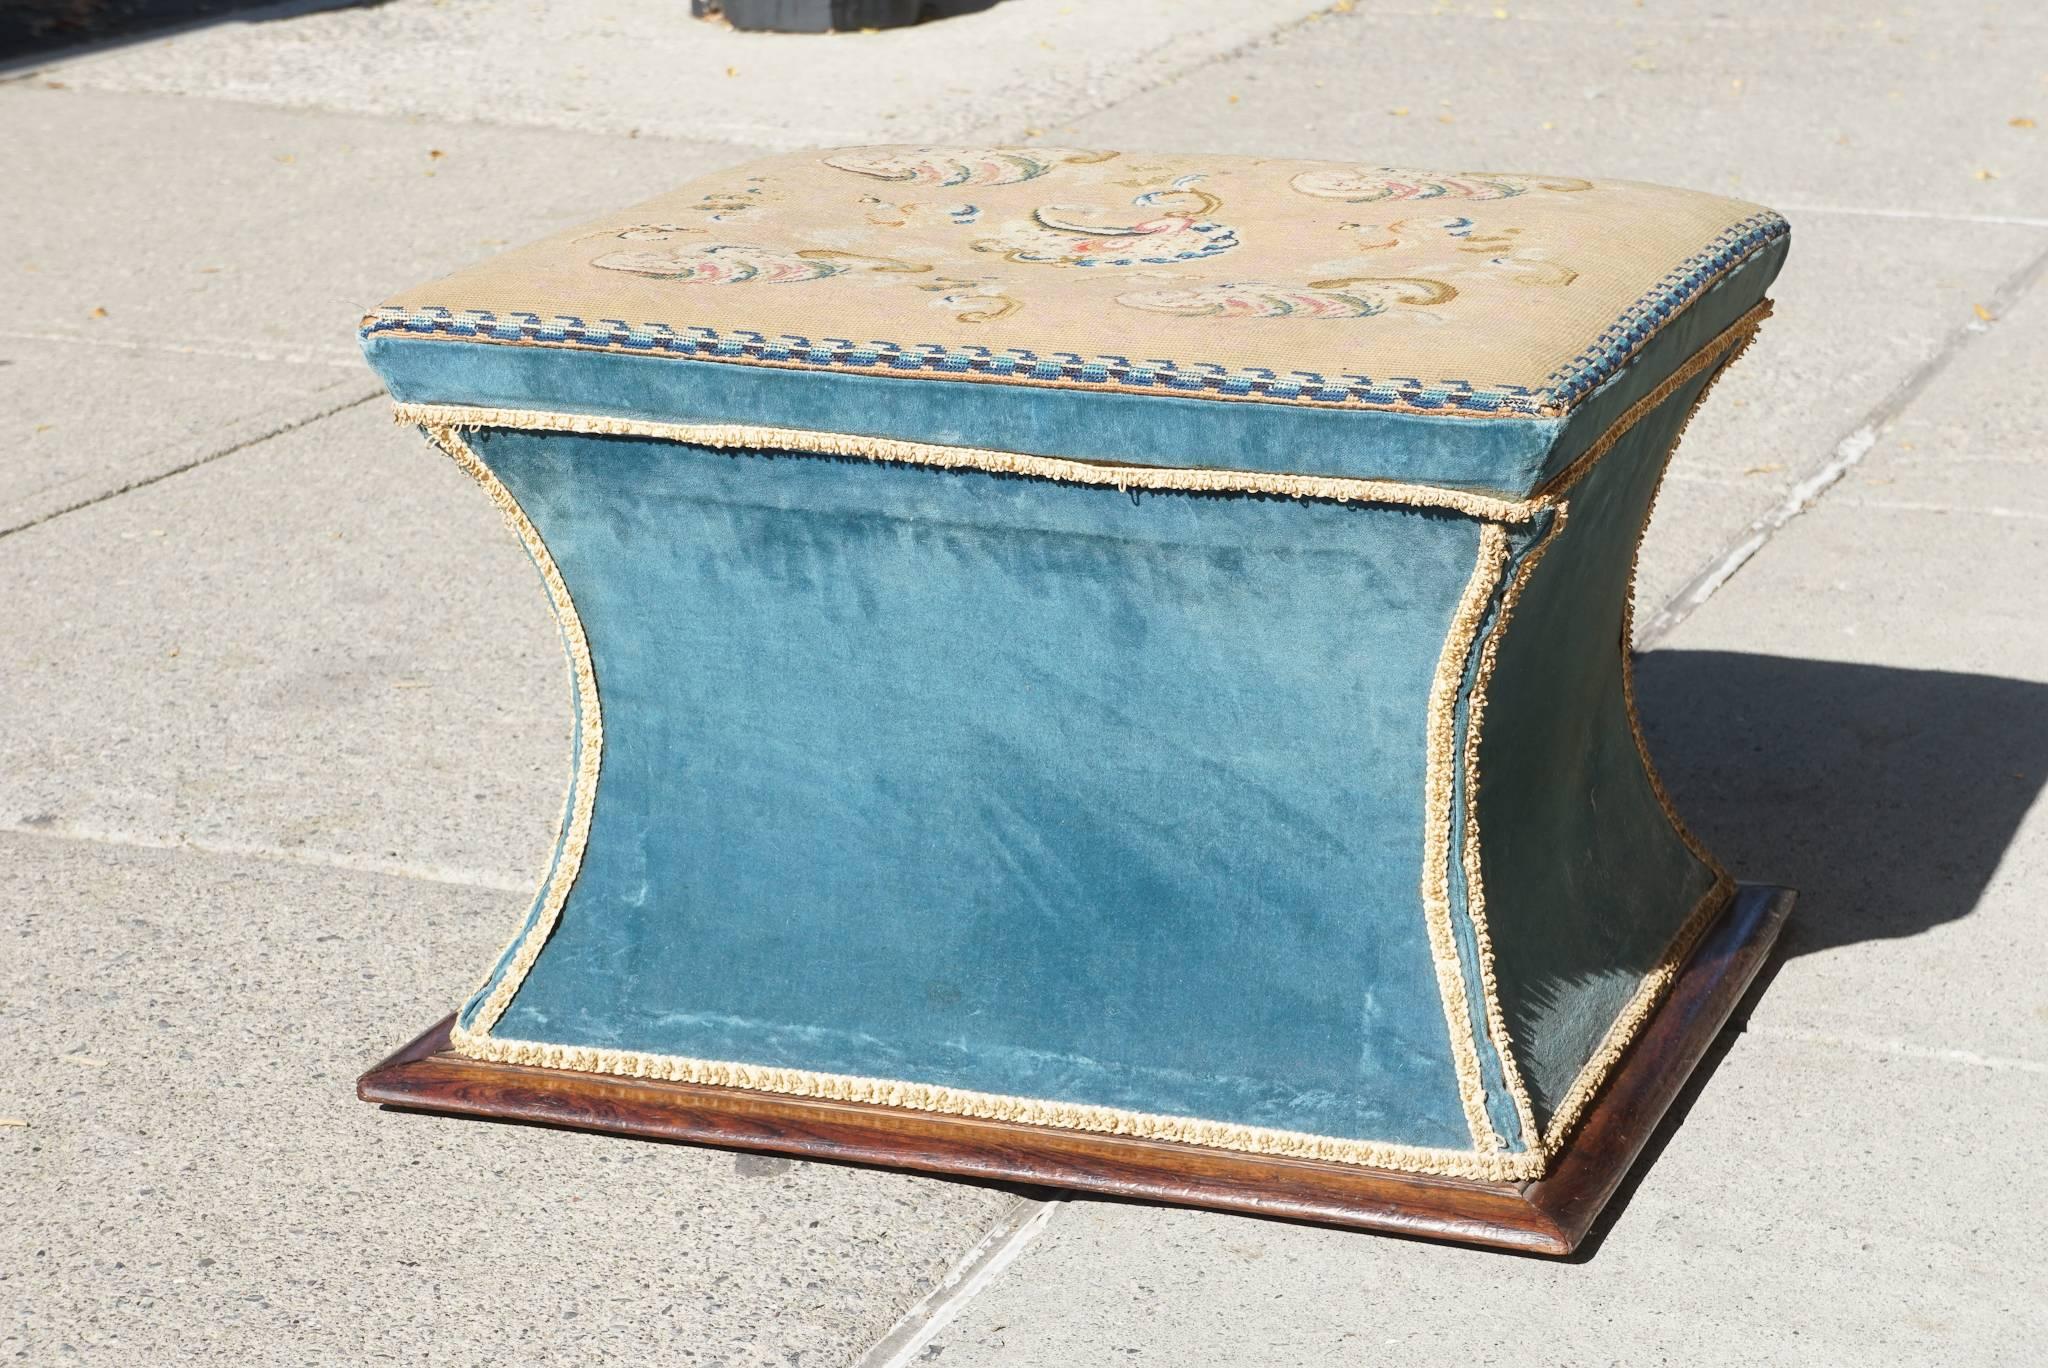 This very good upholstered storage ottoman was made circa 1820 and is fully branded with the maker's name and address (see images 9 & 10). The current upholstery is from the late Victorian era while the needlepoint top is of a slightly earlier time